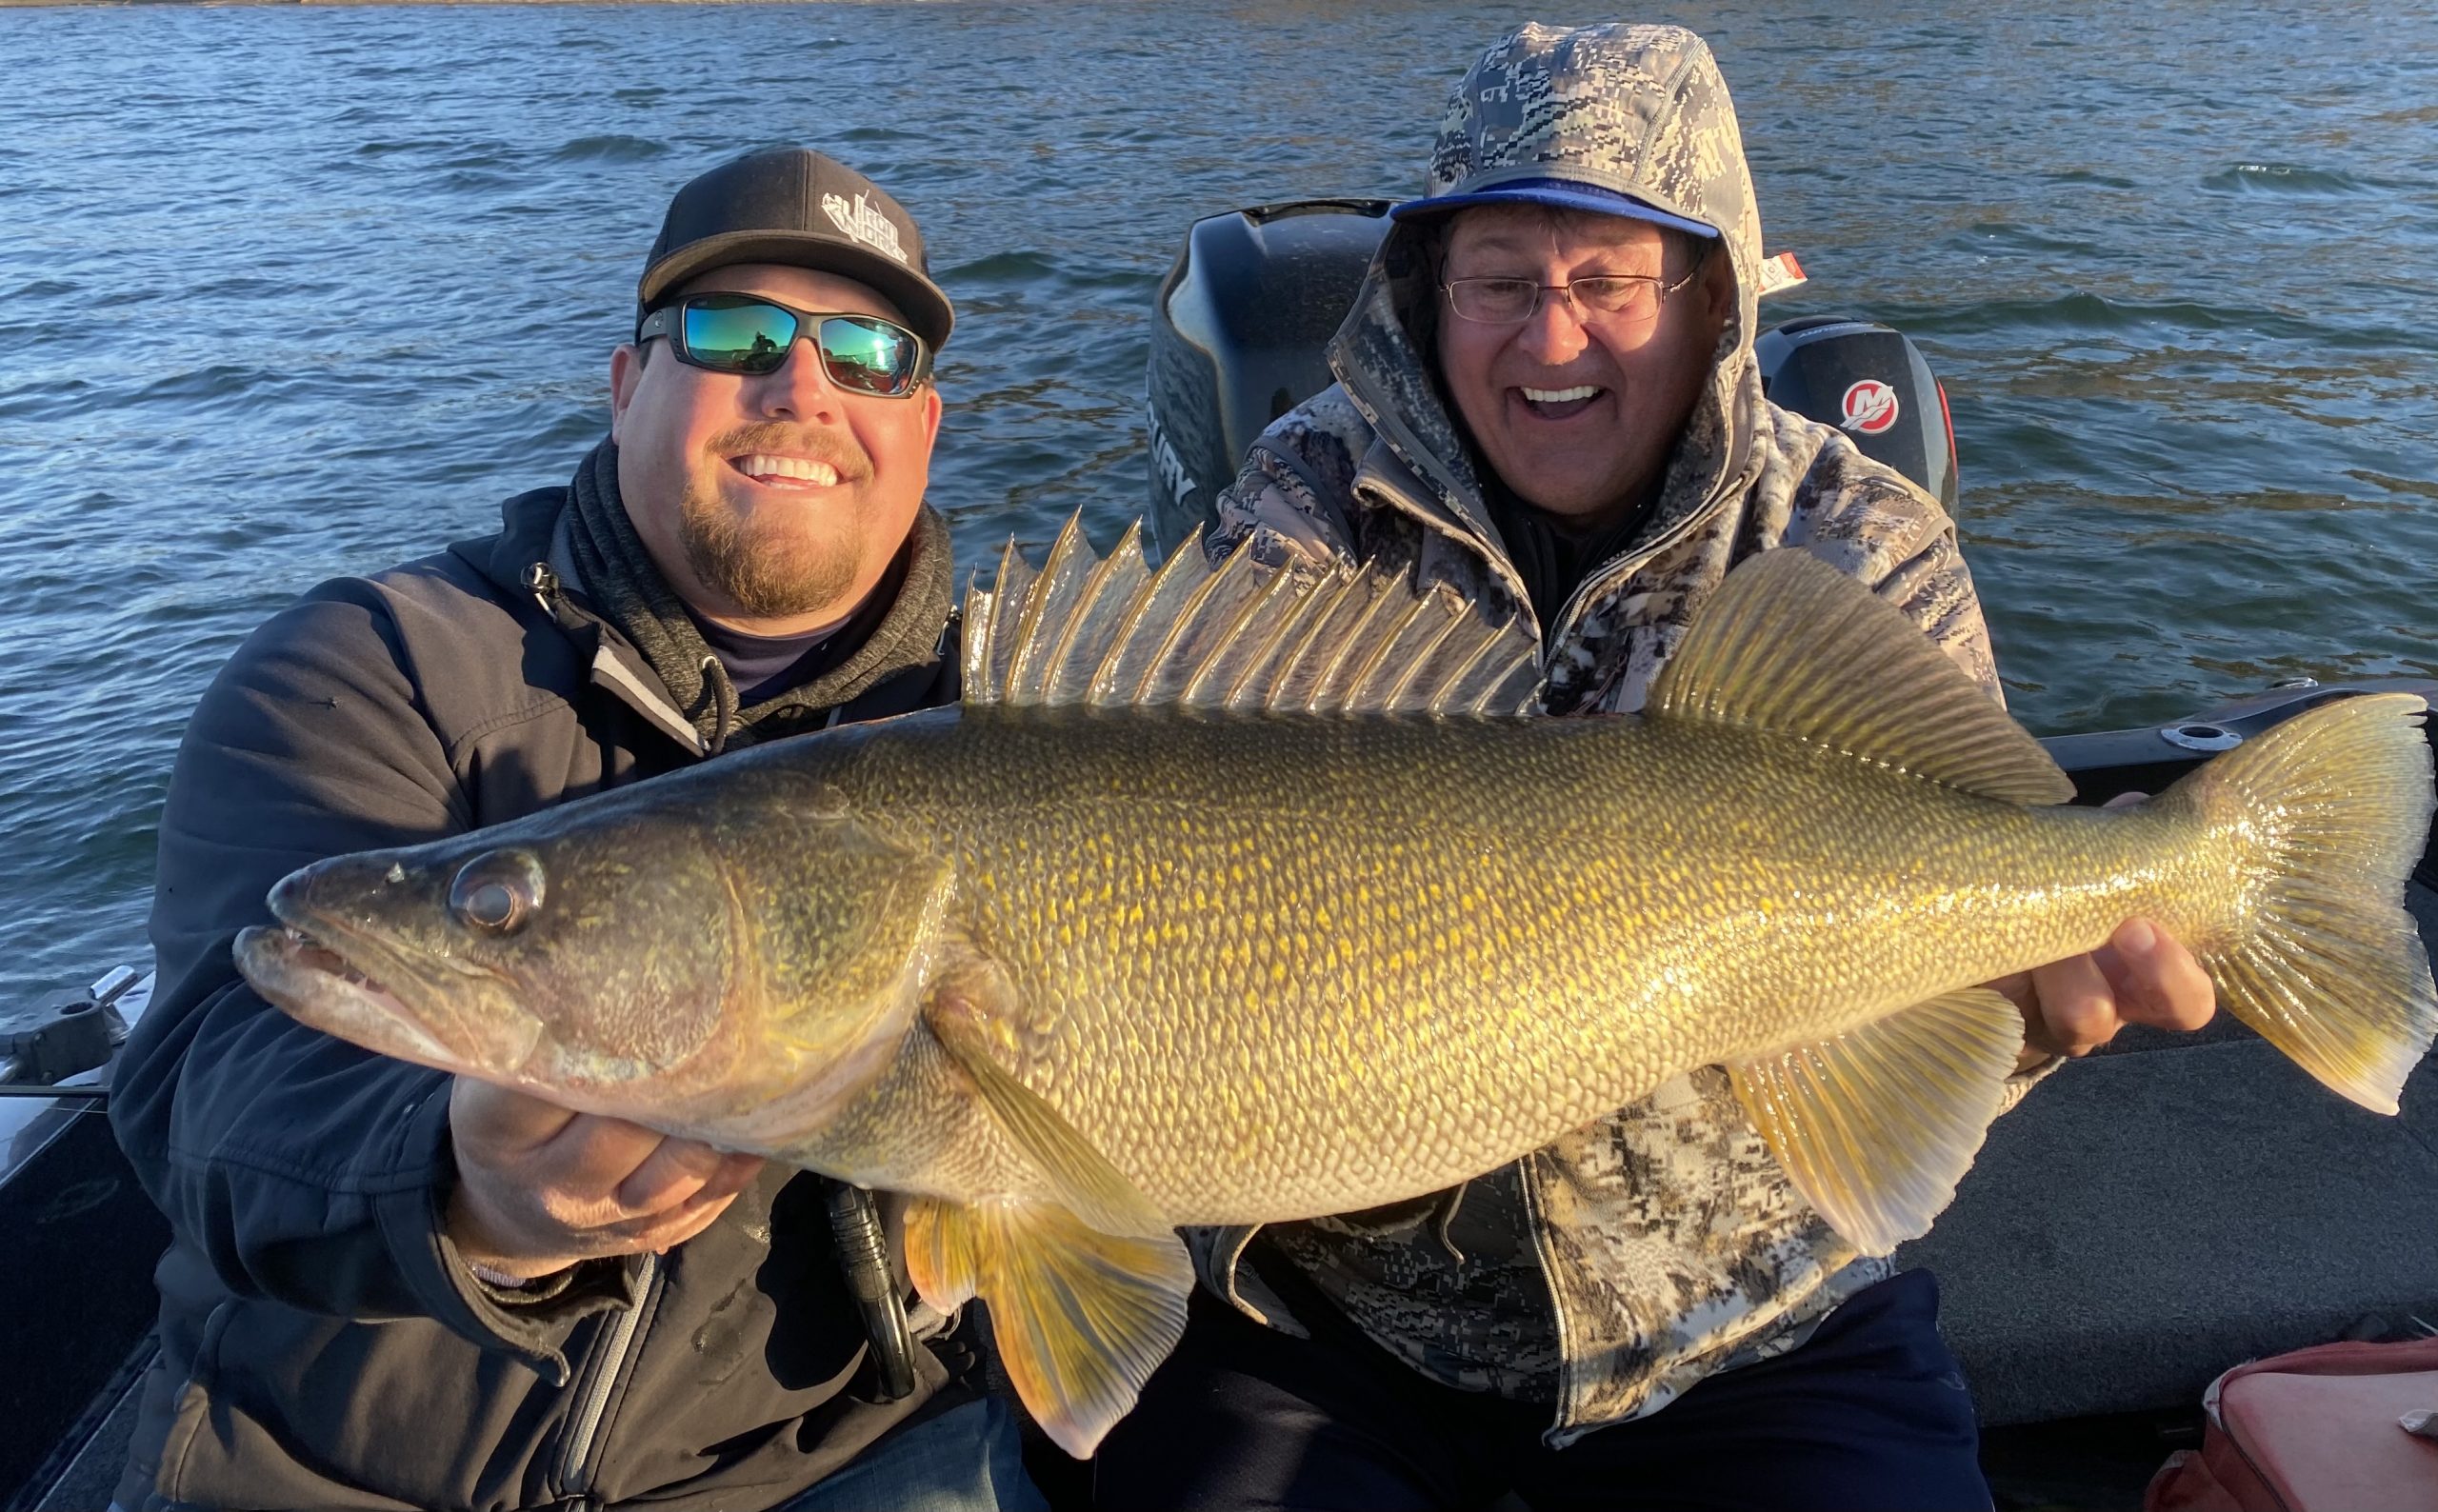 Could-have-been record walleye proves July 4th fishing can be hot